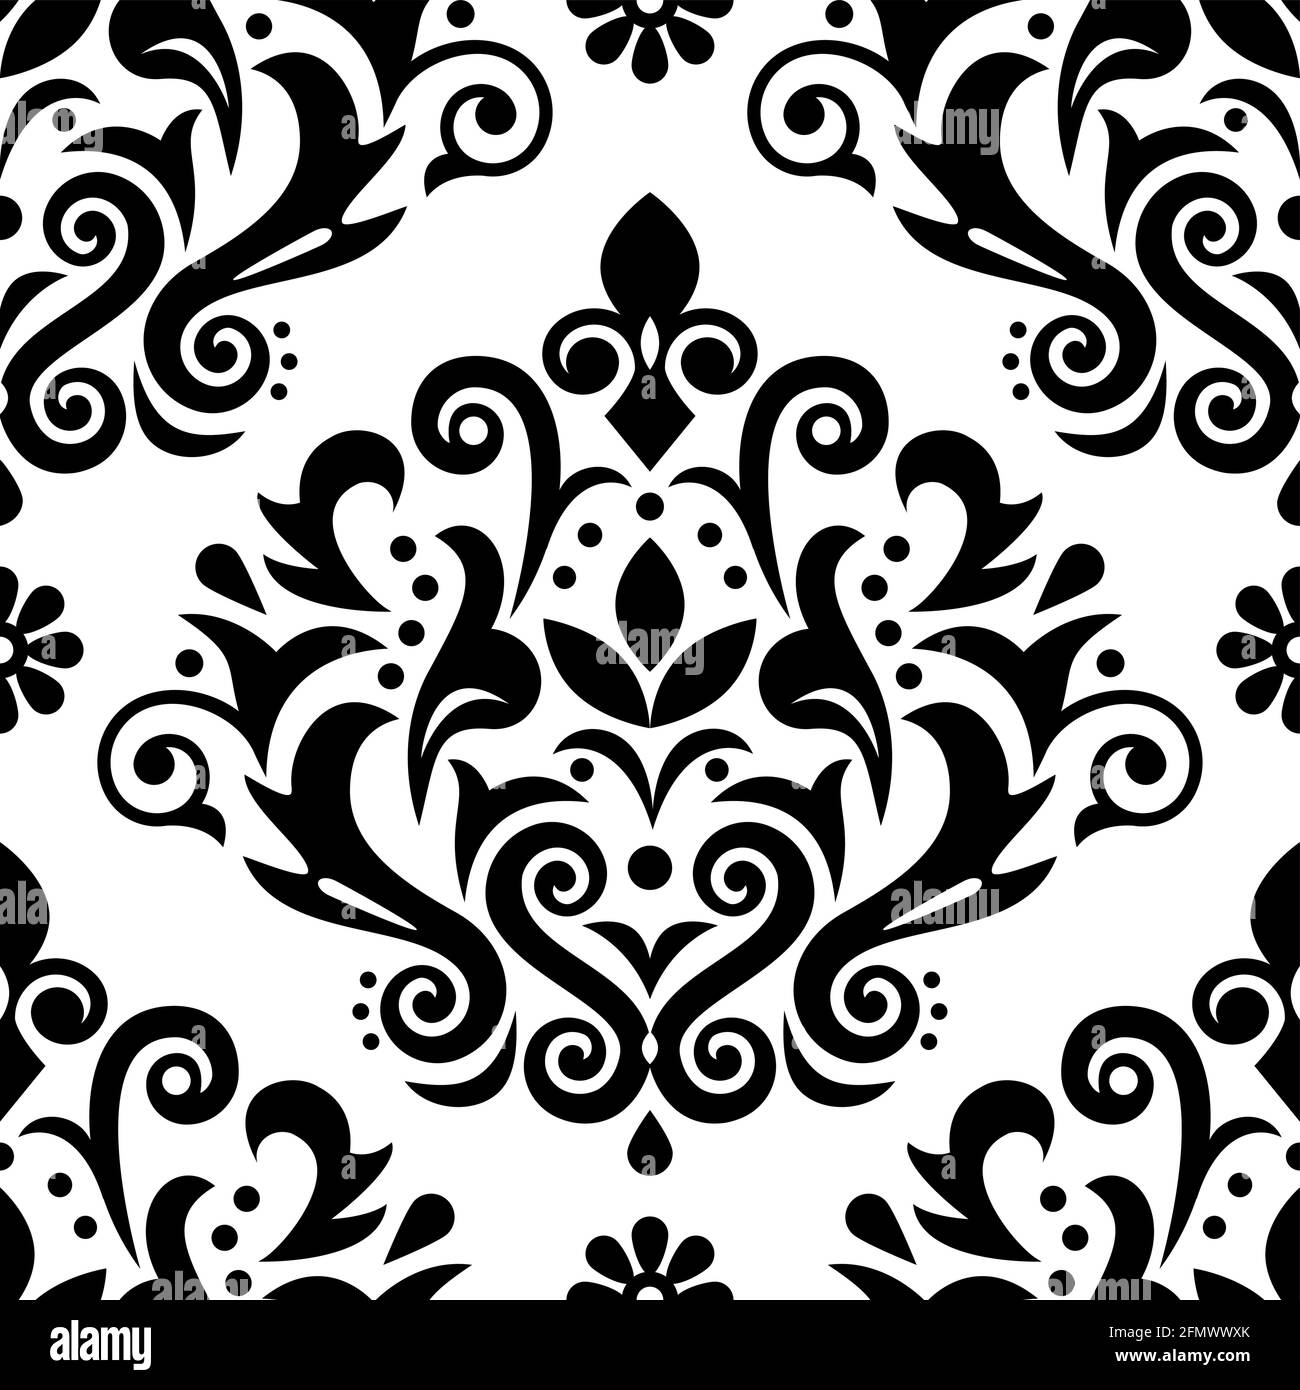 Damask luxury vector seamless pattern, victorian black and white textile or fabric print design with flowers, swirls and leaves Stock Vector